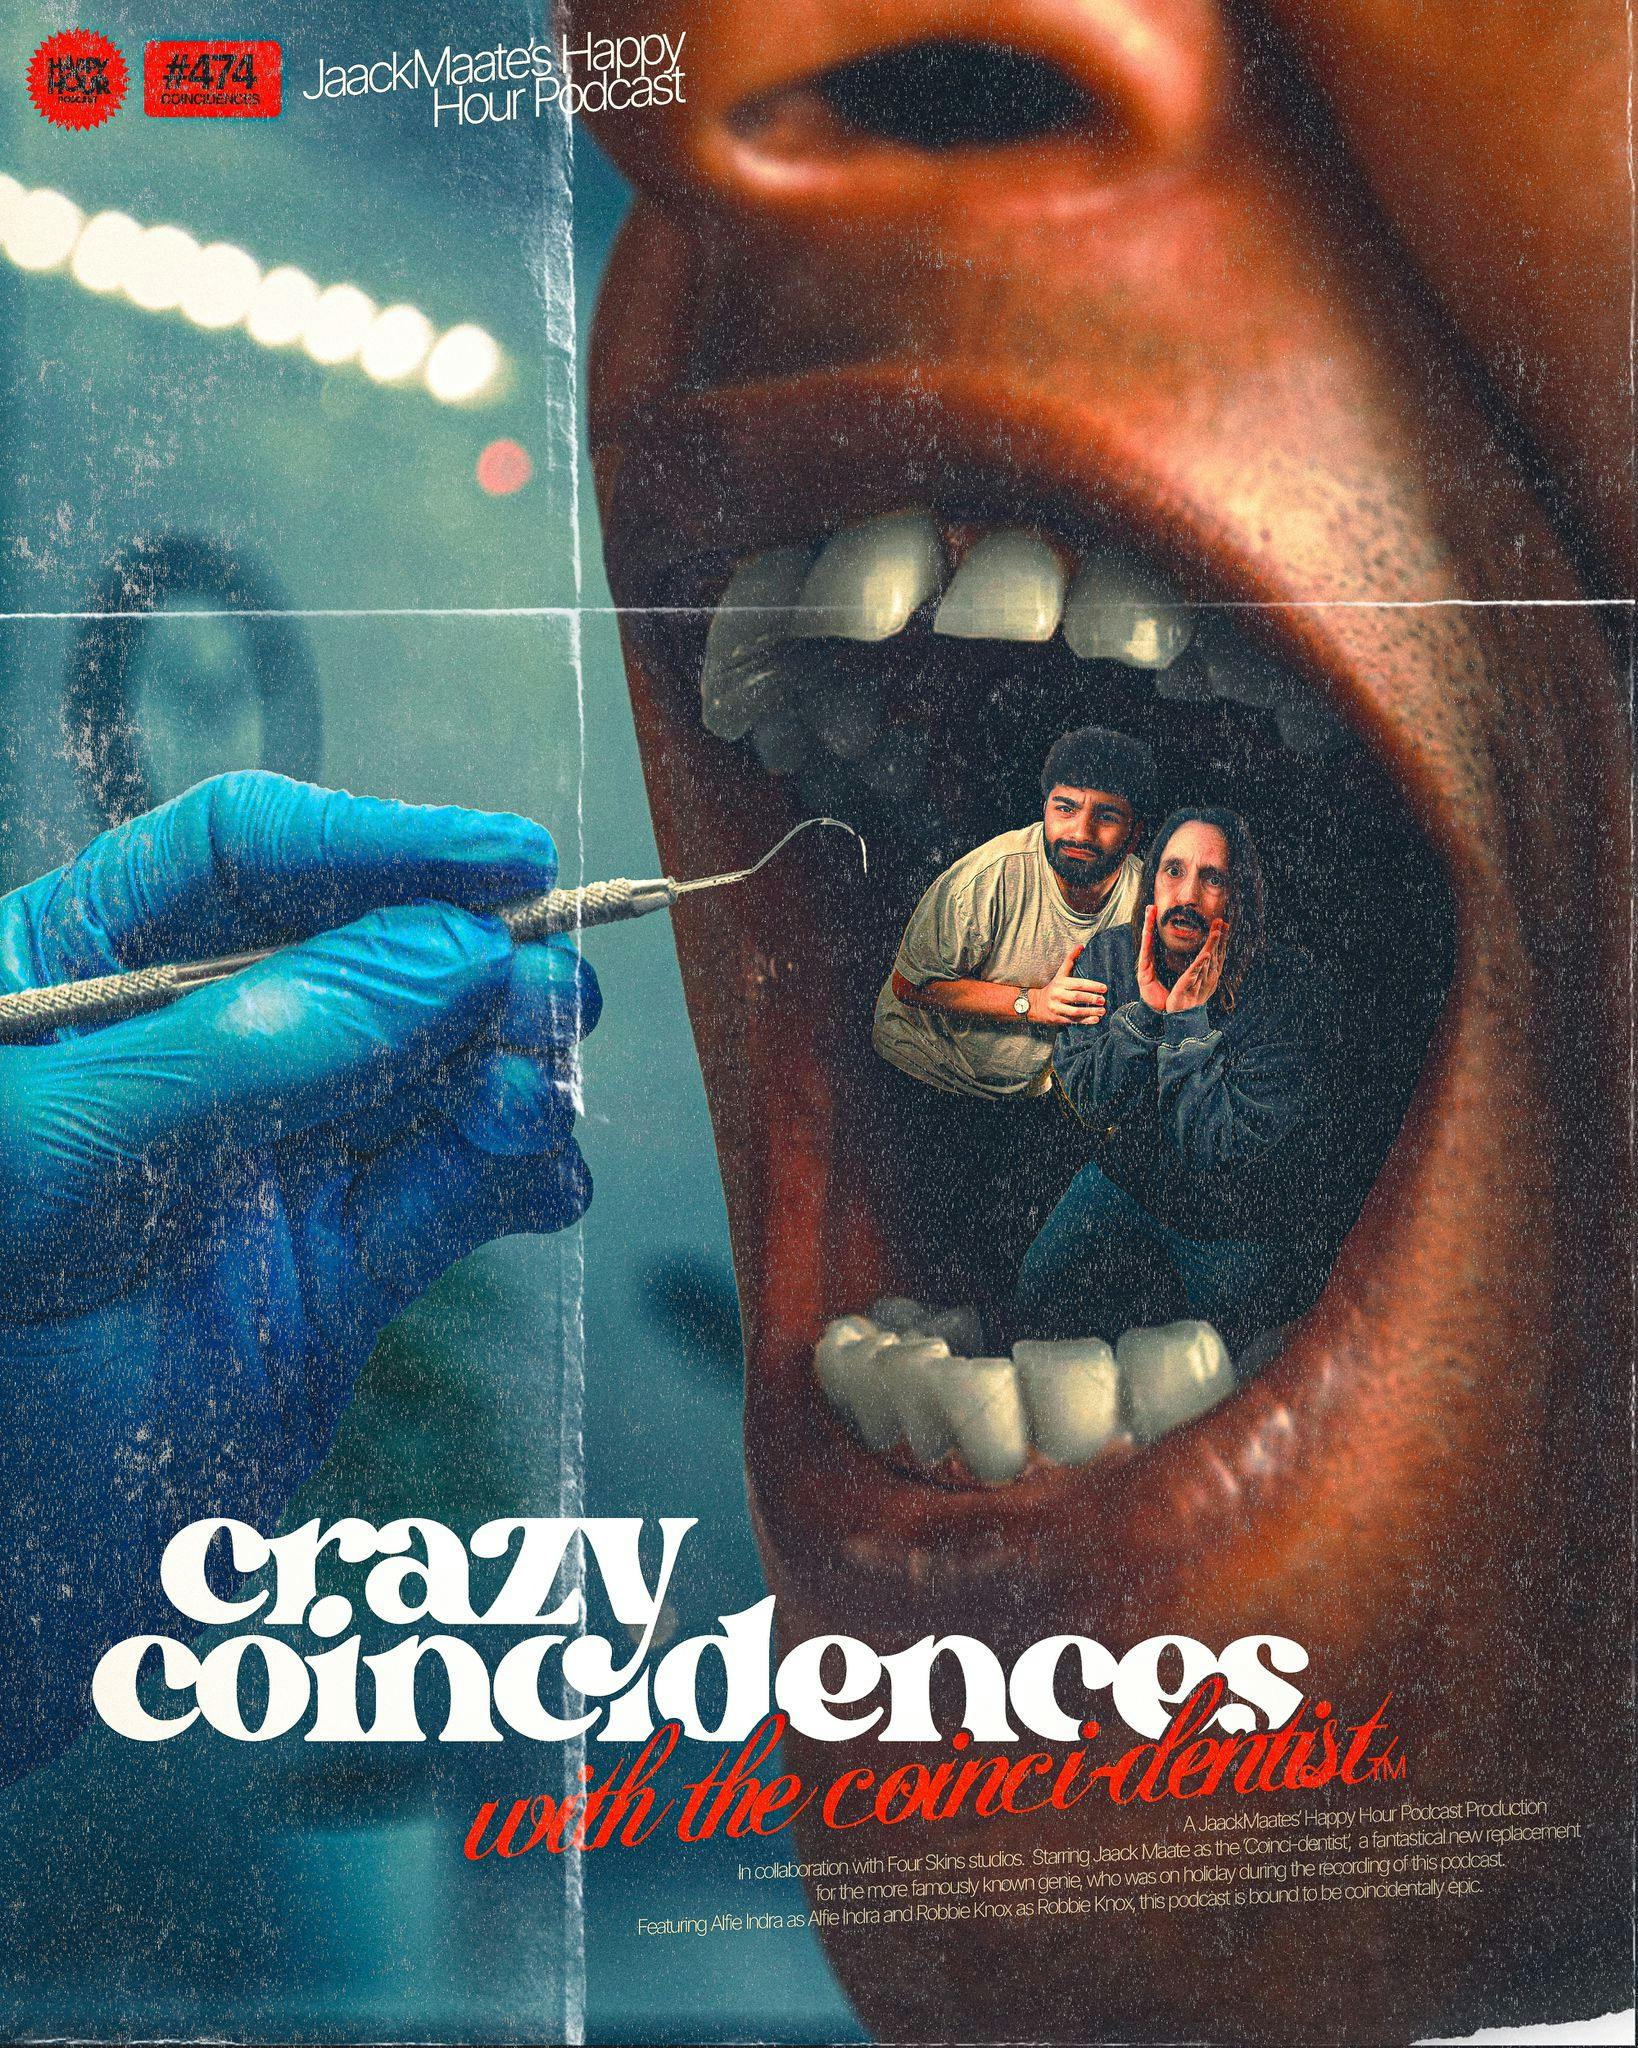 474 - The World's CRAZIEST Coincidences! (ft. The Coinci-dentist)